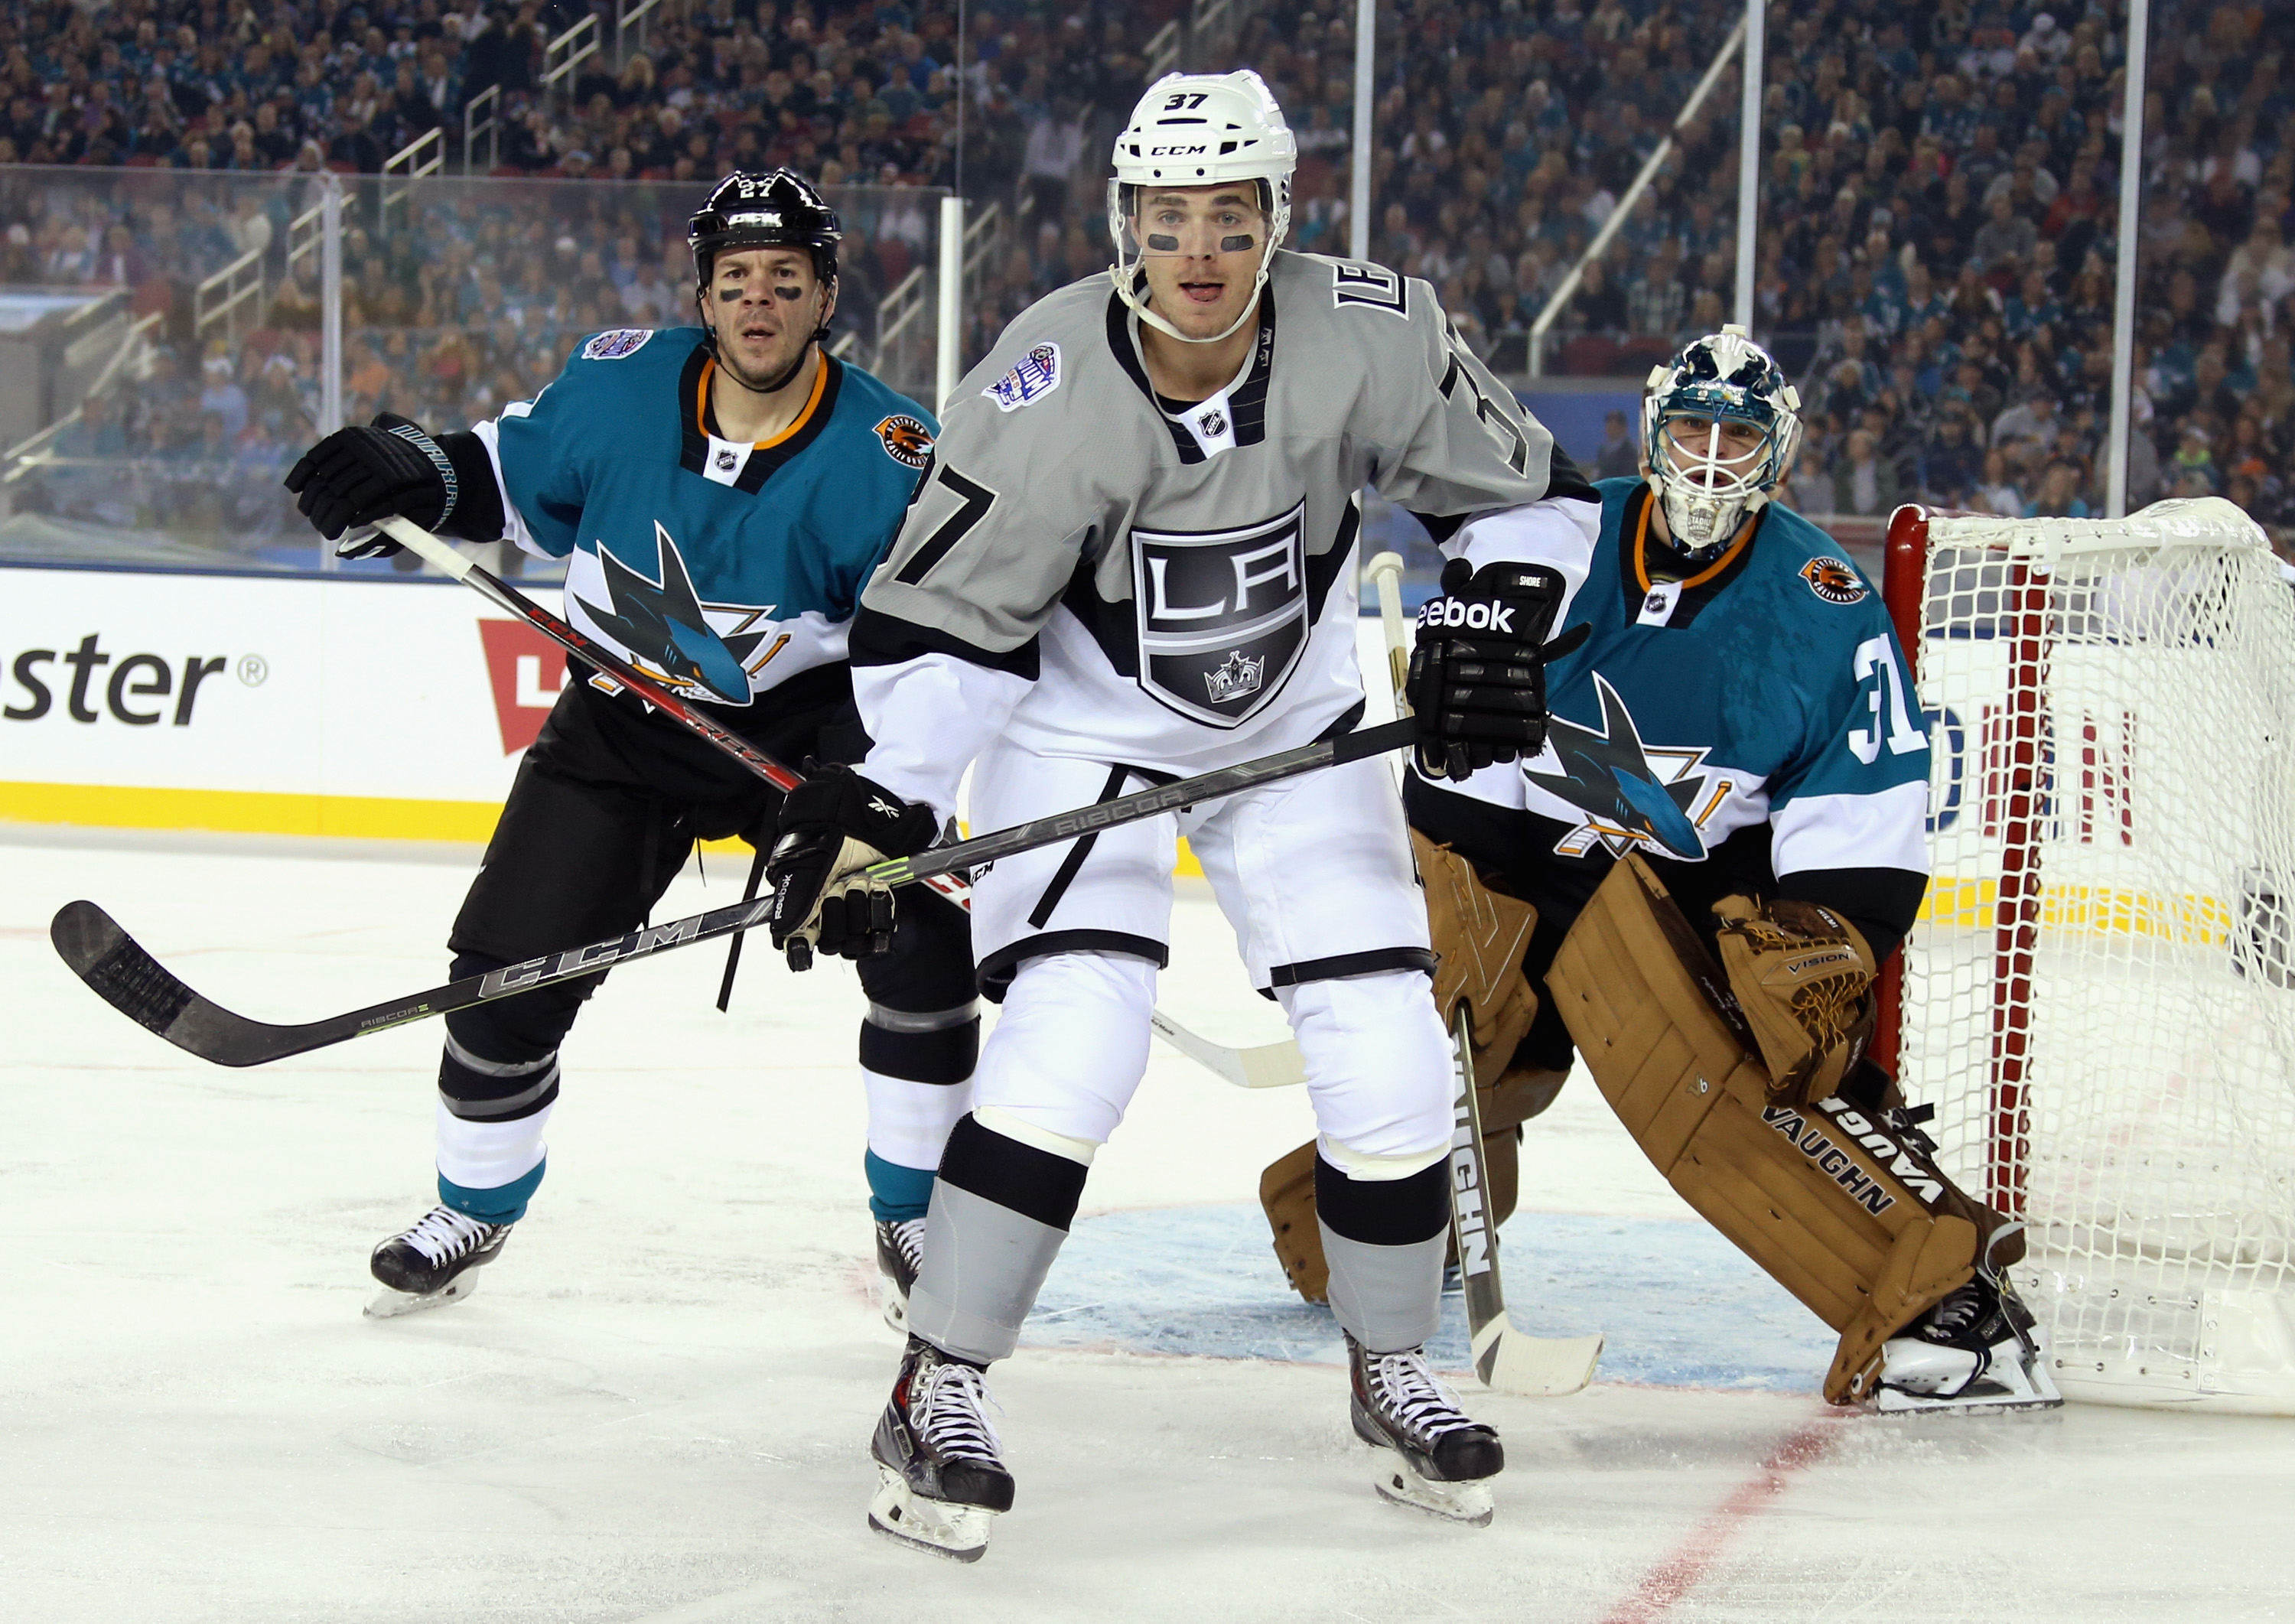 2015 COORS LIGHT NHL STADIUM SERIES™ GAME TO FEATURE SAN JOSE SHARKS AND  LOS ANGELES KINGS AT LEVI'S® STADIUM